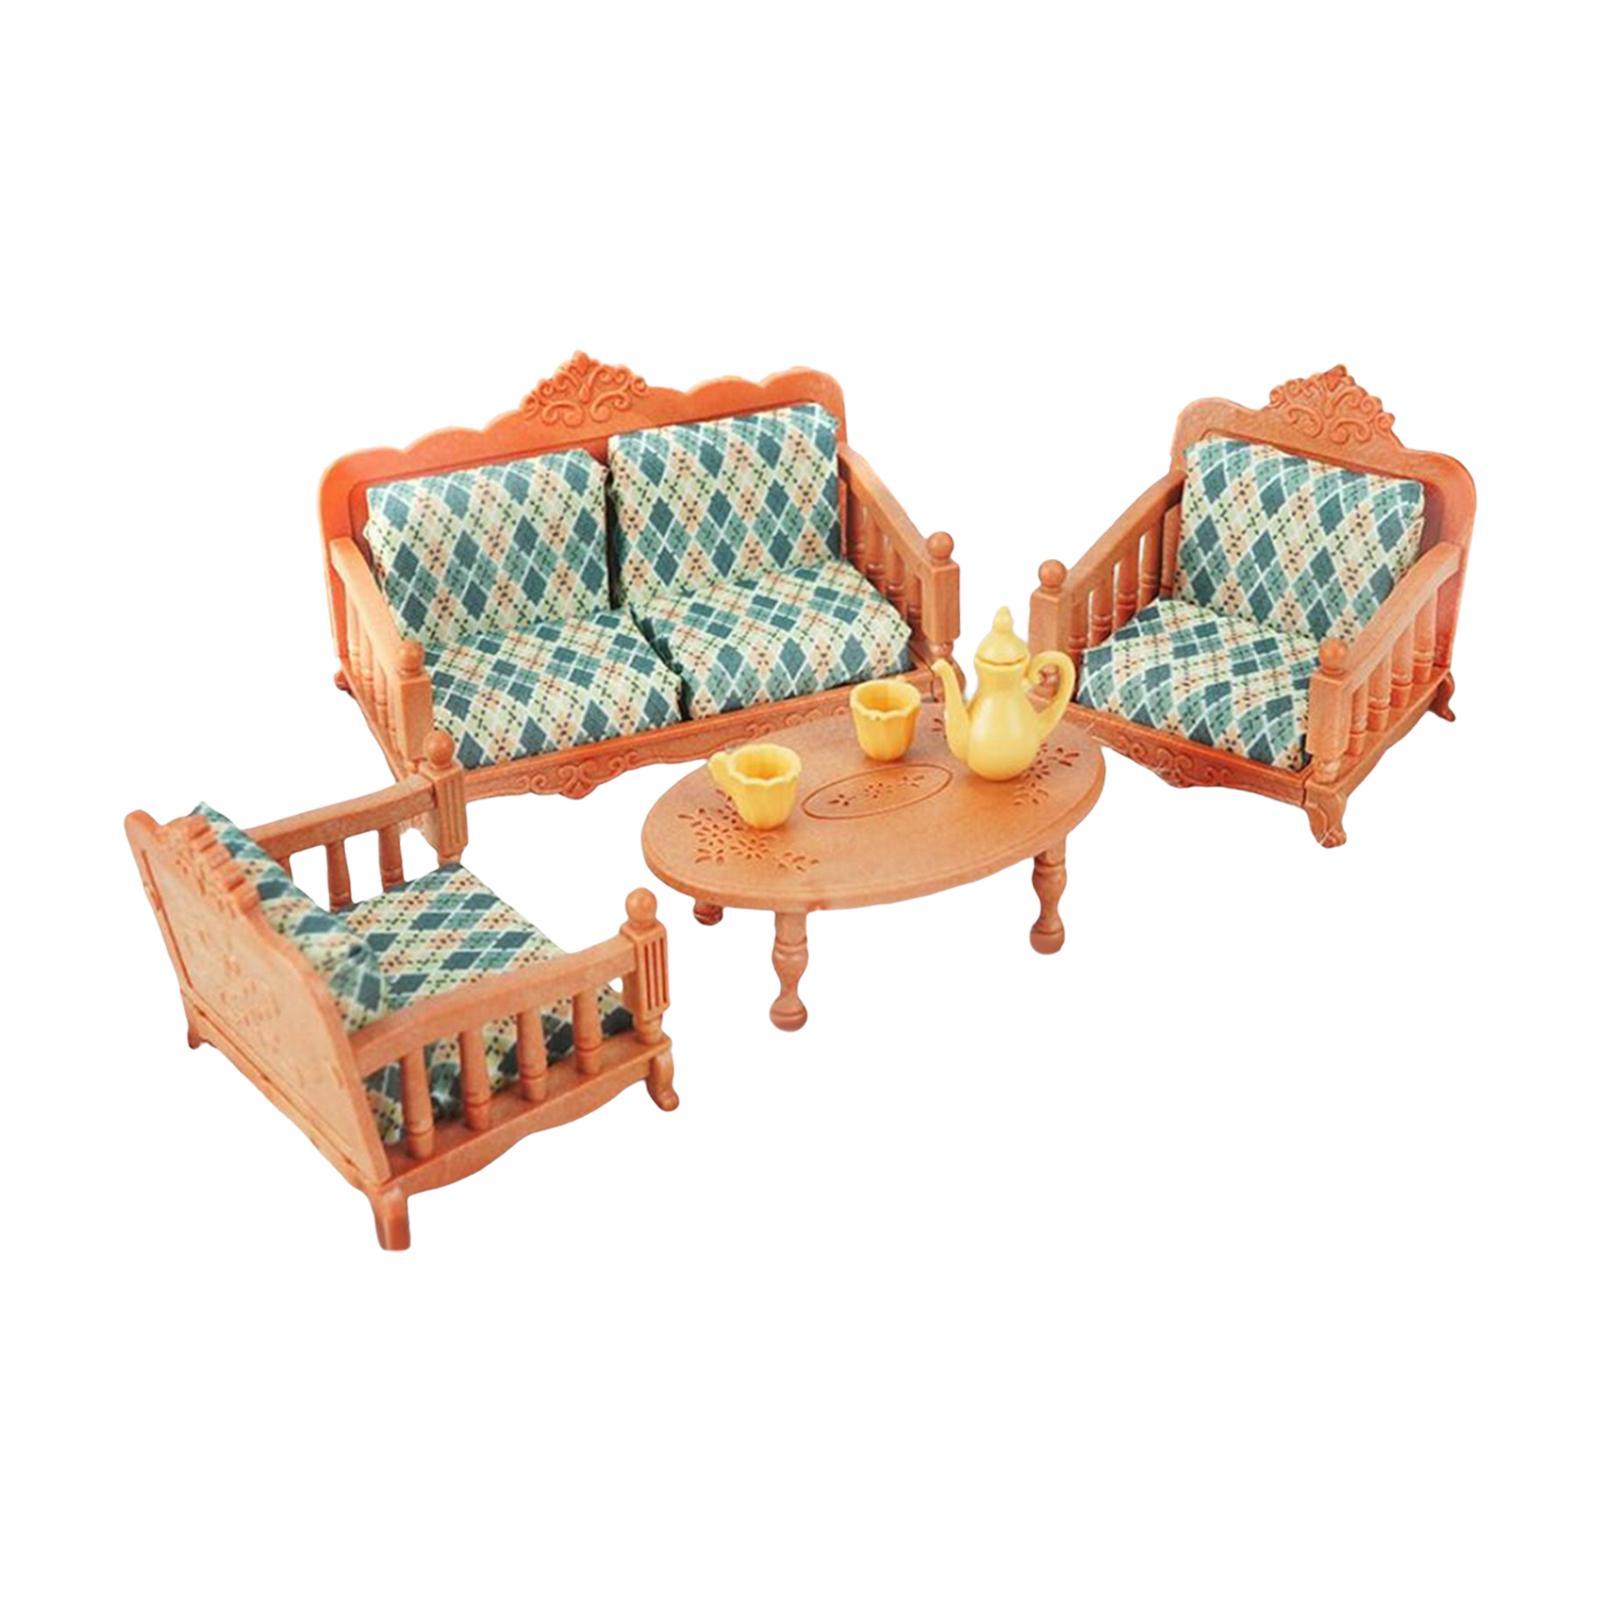 Doll House Furniture Toys Accessory  Decor for  House